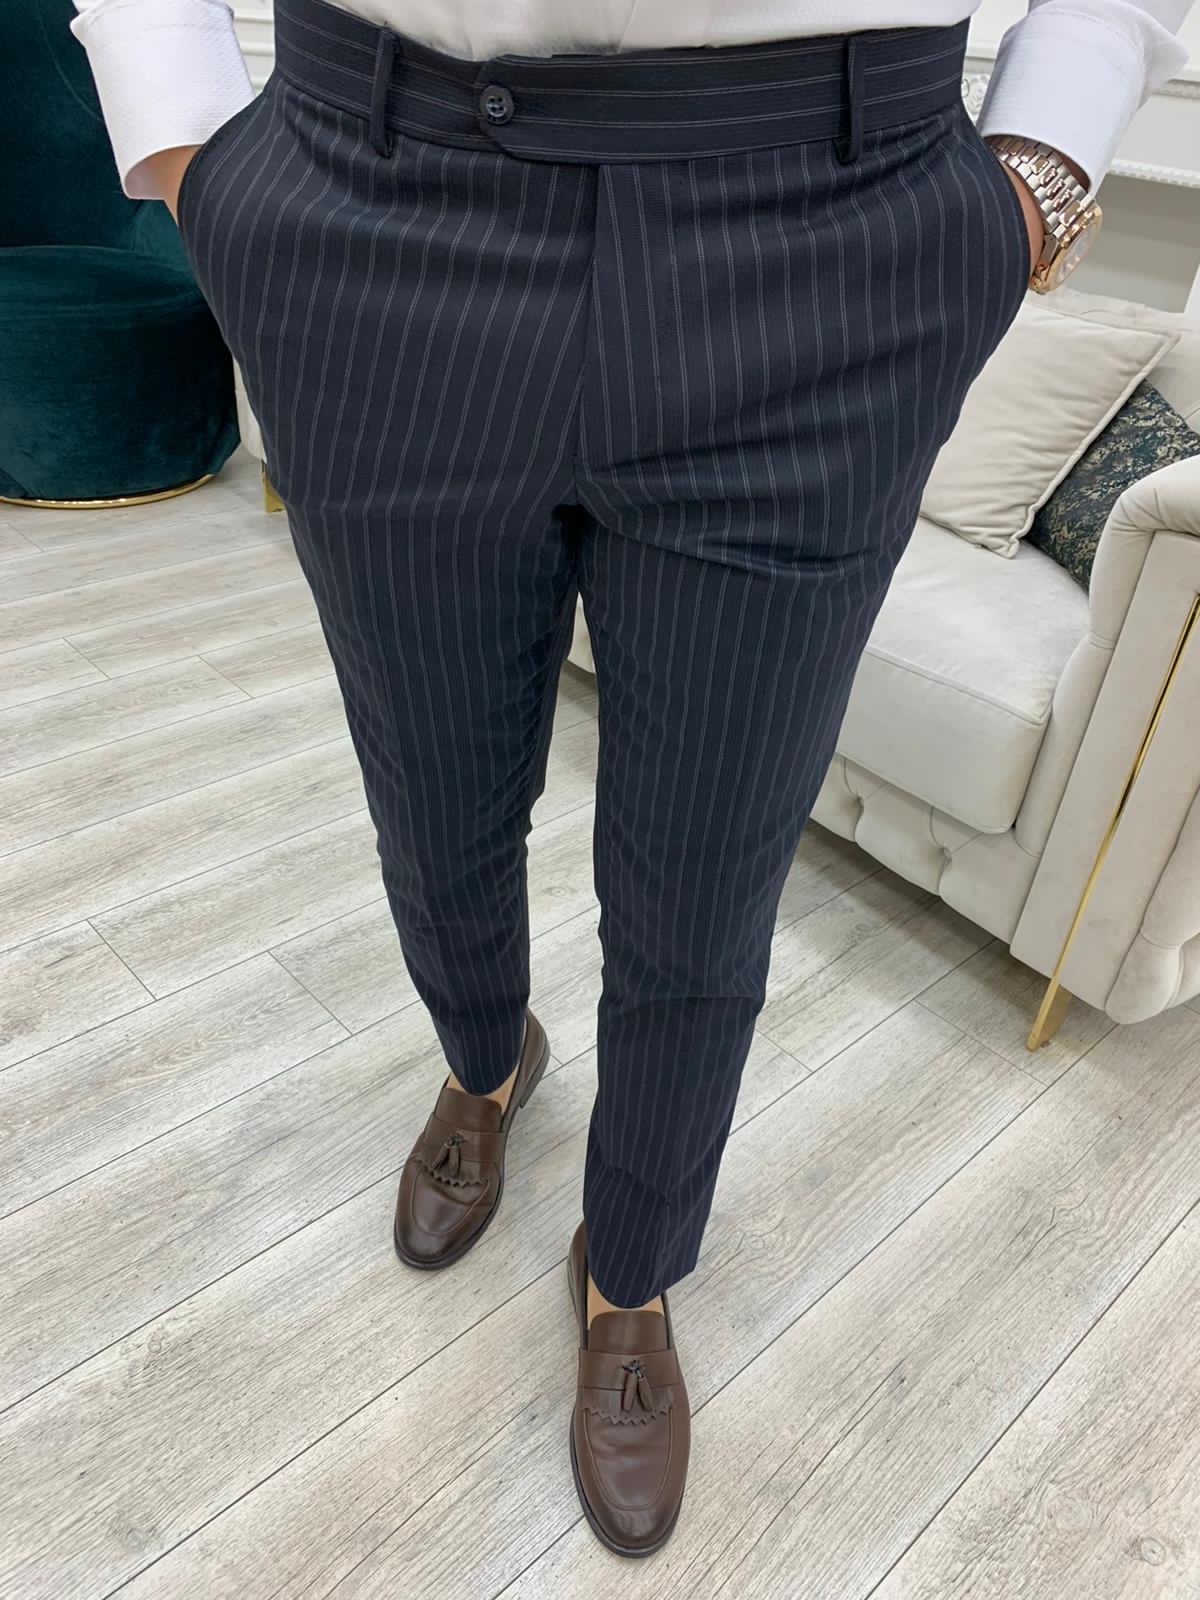 Dark Navy Blue Striped Double Breasted Suit